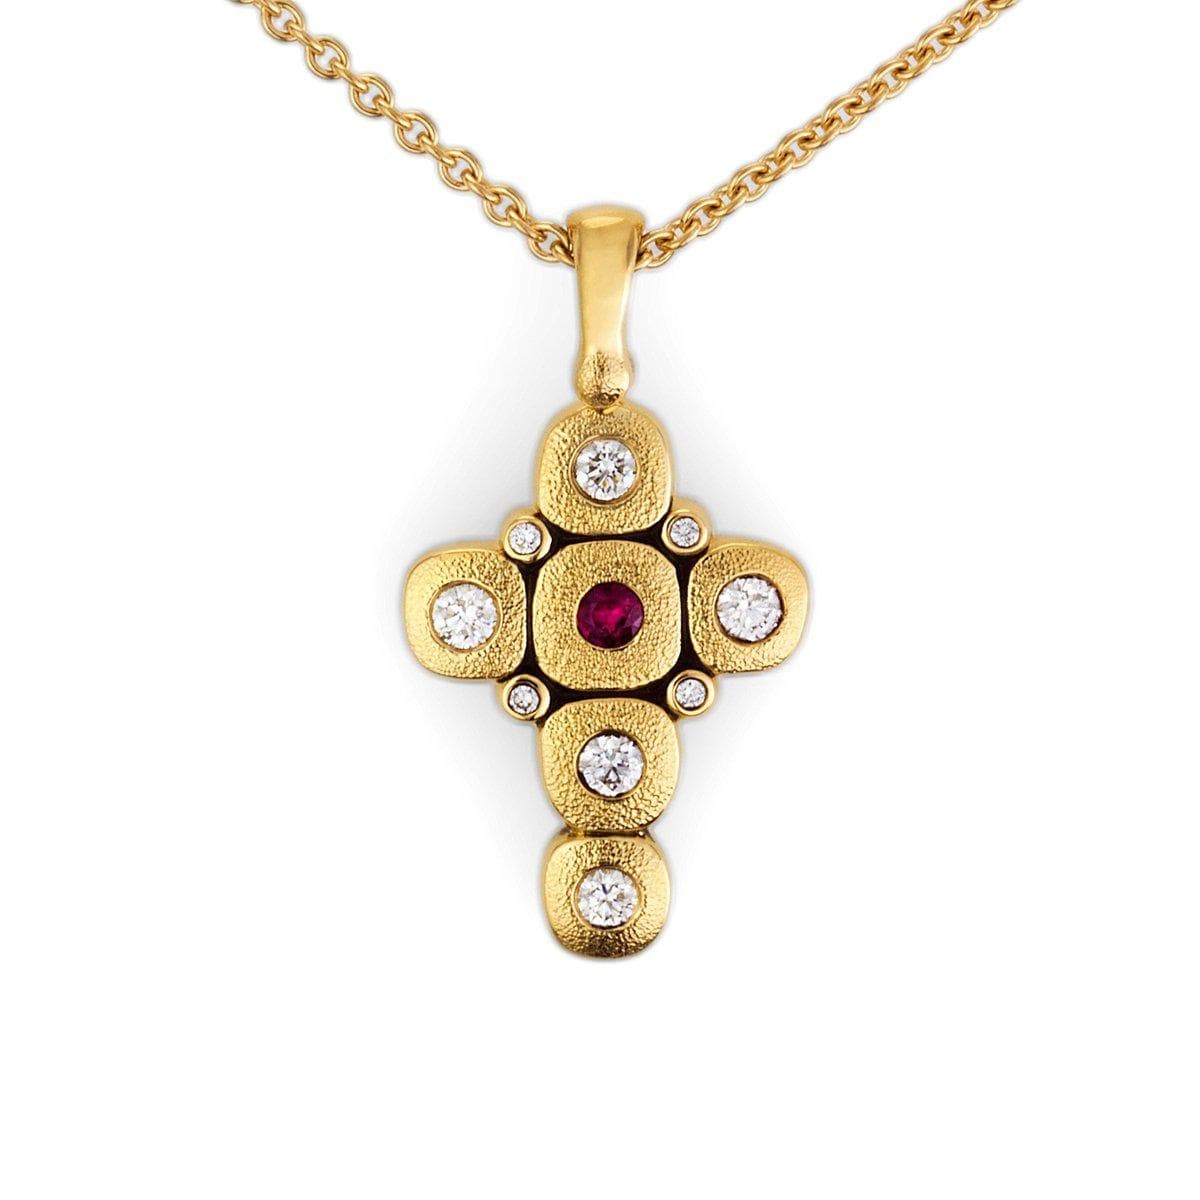 18K Real Gold Plated Diamond Cross Necklace